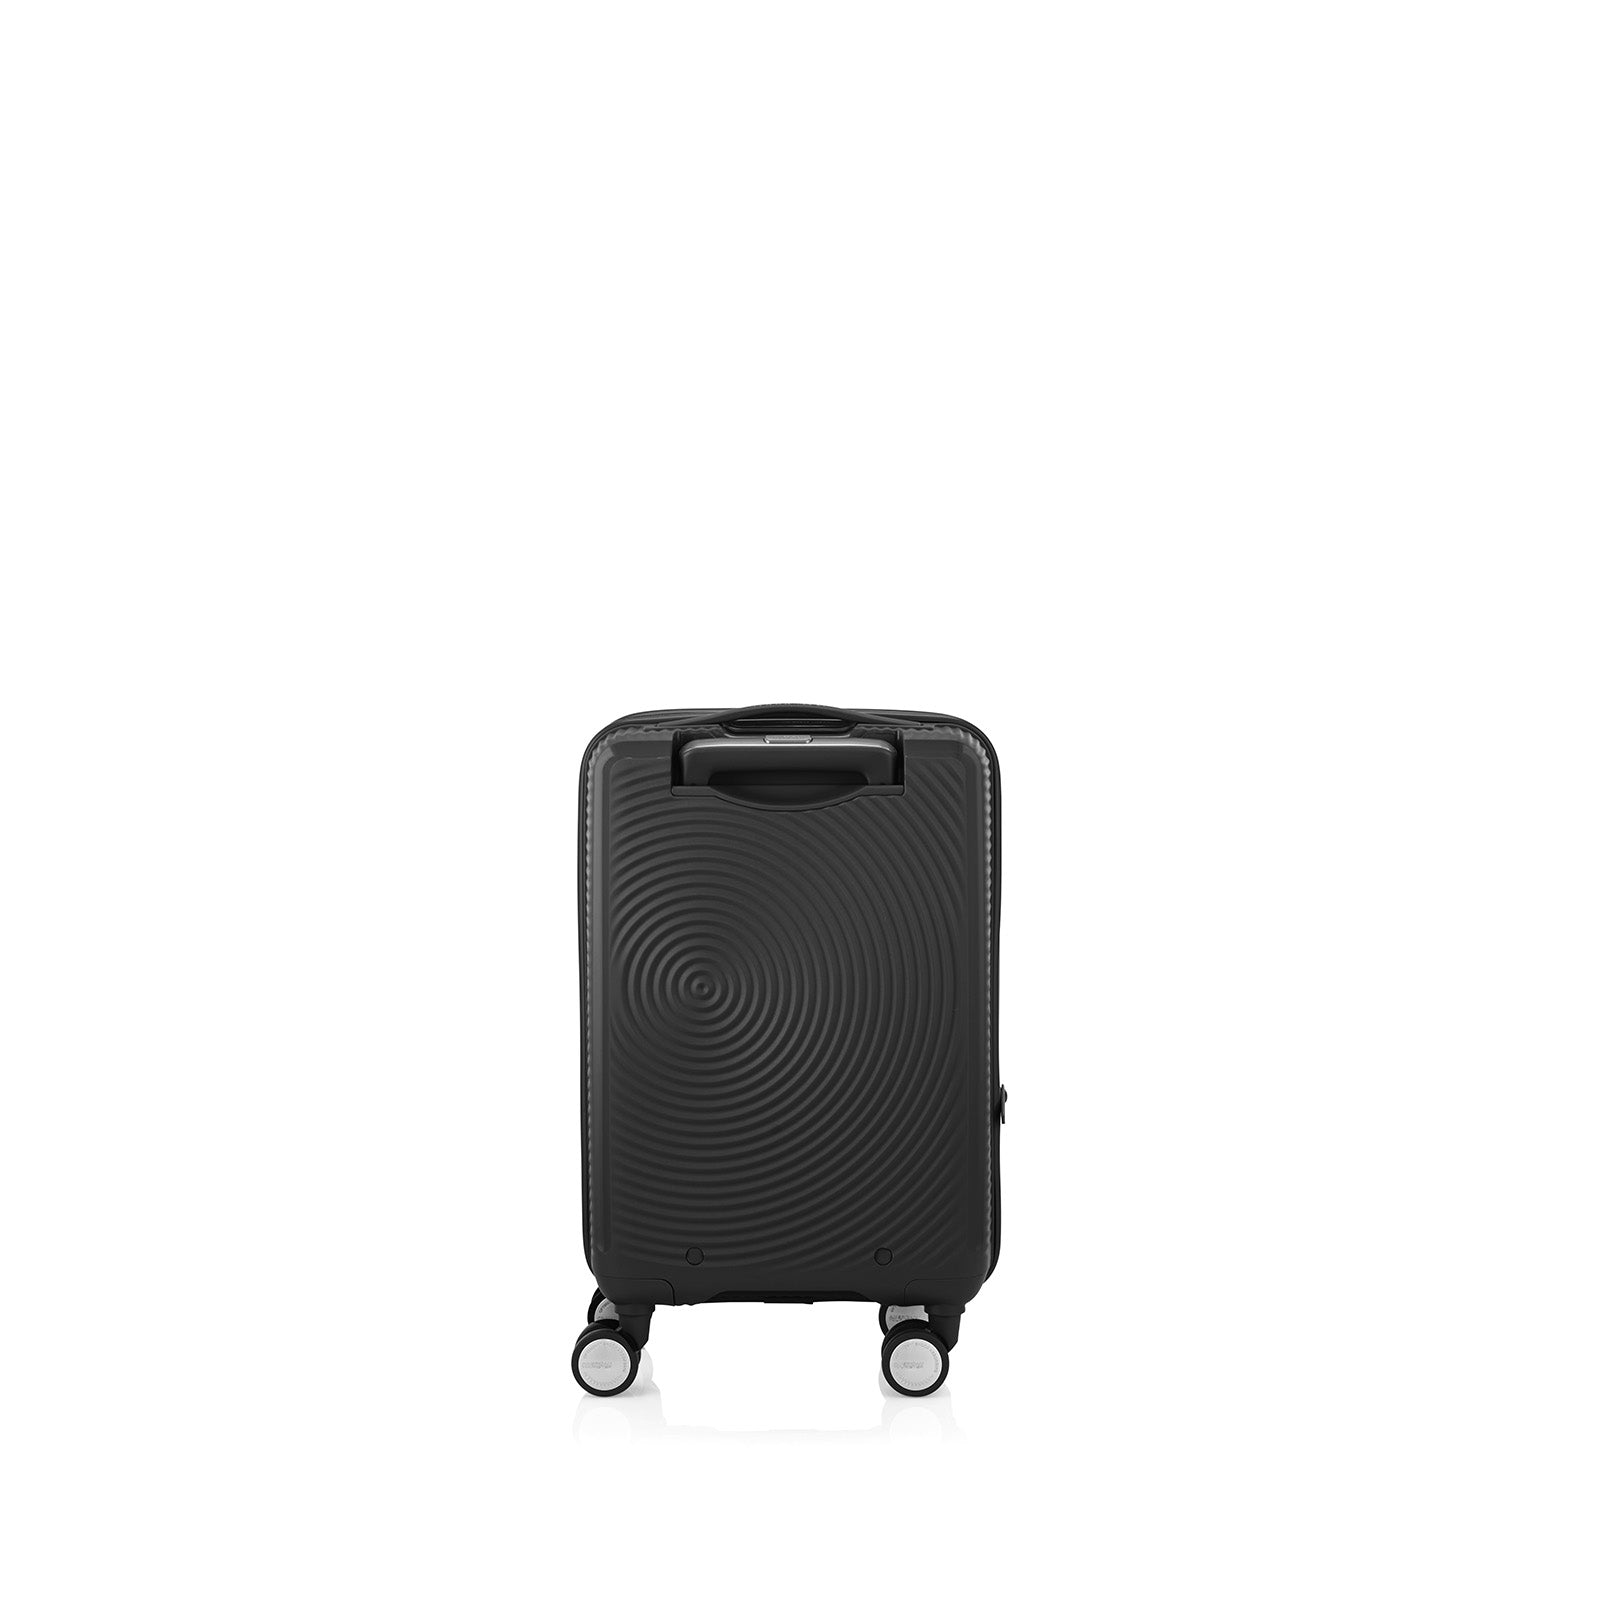 American-Tourister-Curio-Book-Opening-55cm-Carry-On-Suitcase-Black-Back